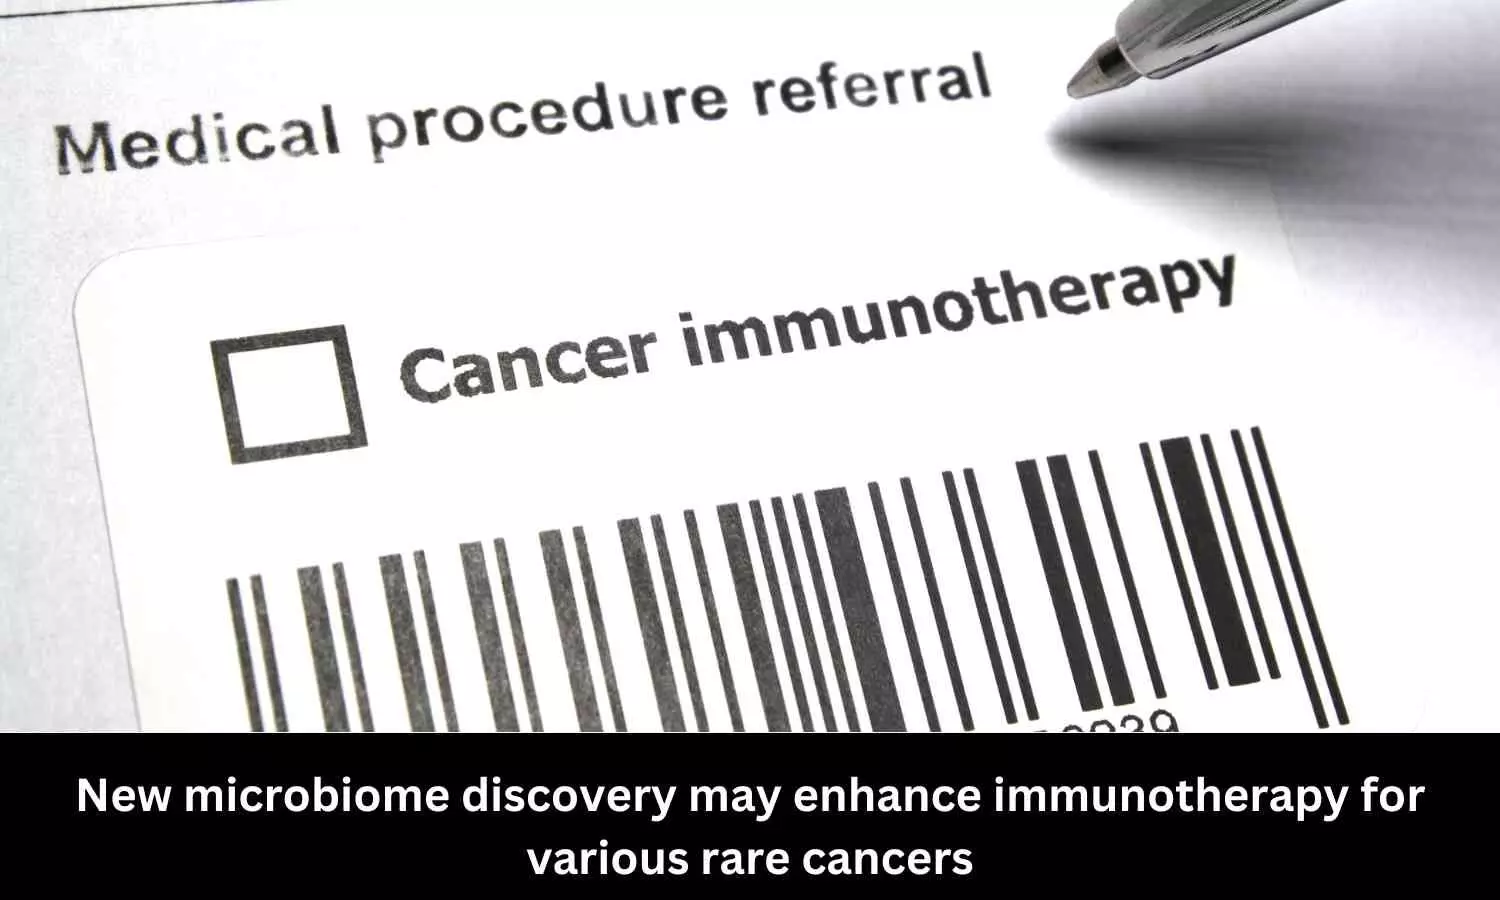 New microbiome discovery may enhance immunotherapy for various rare cancers